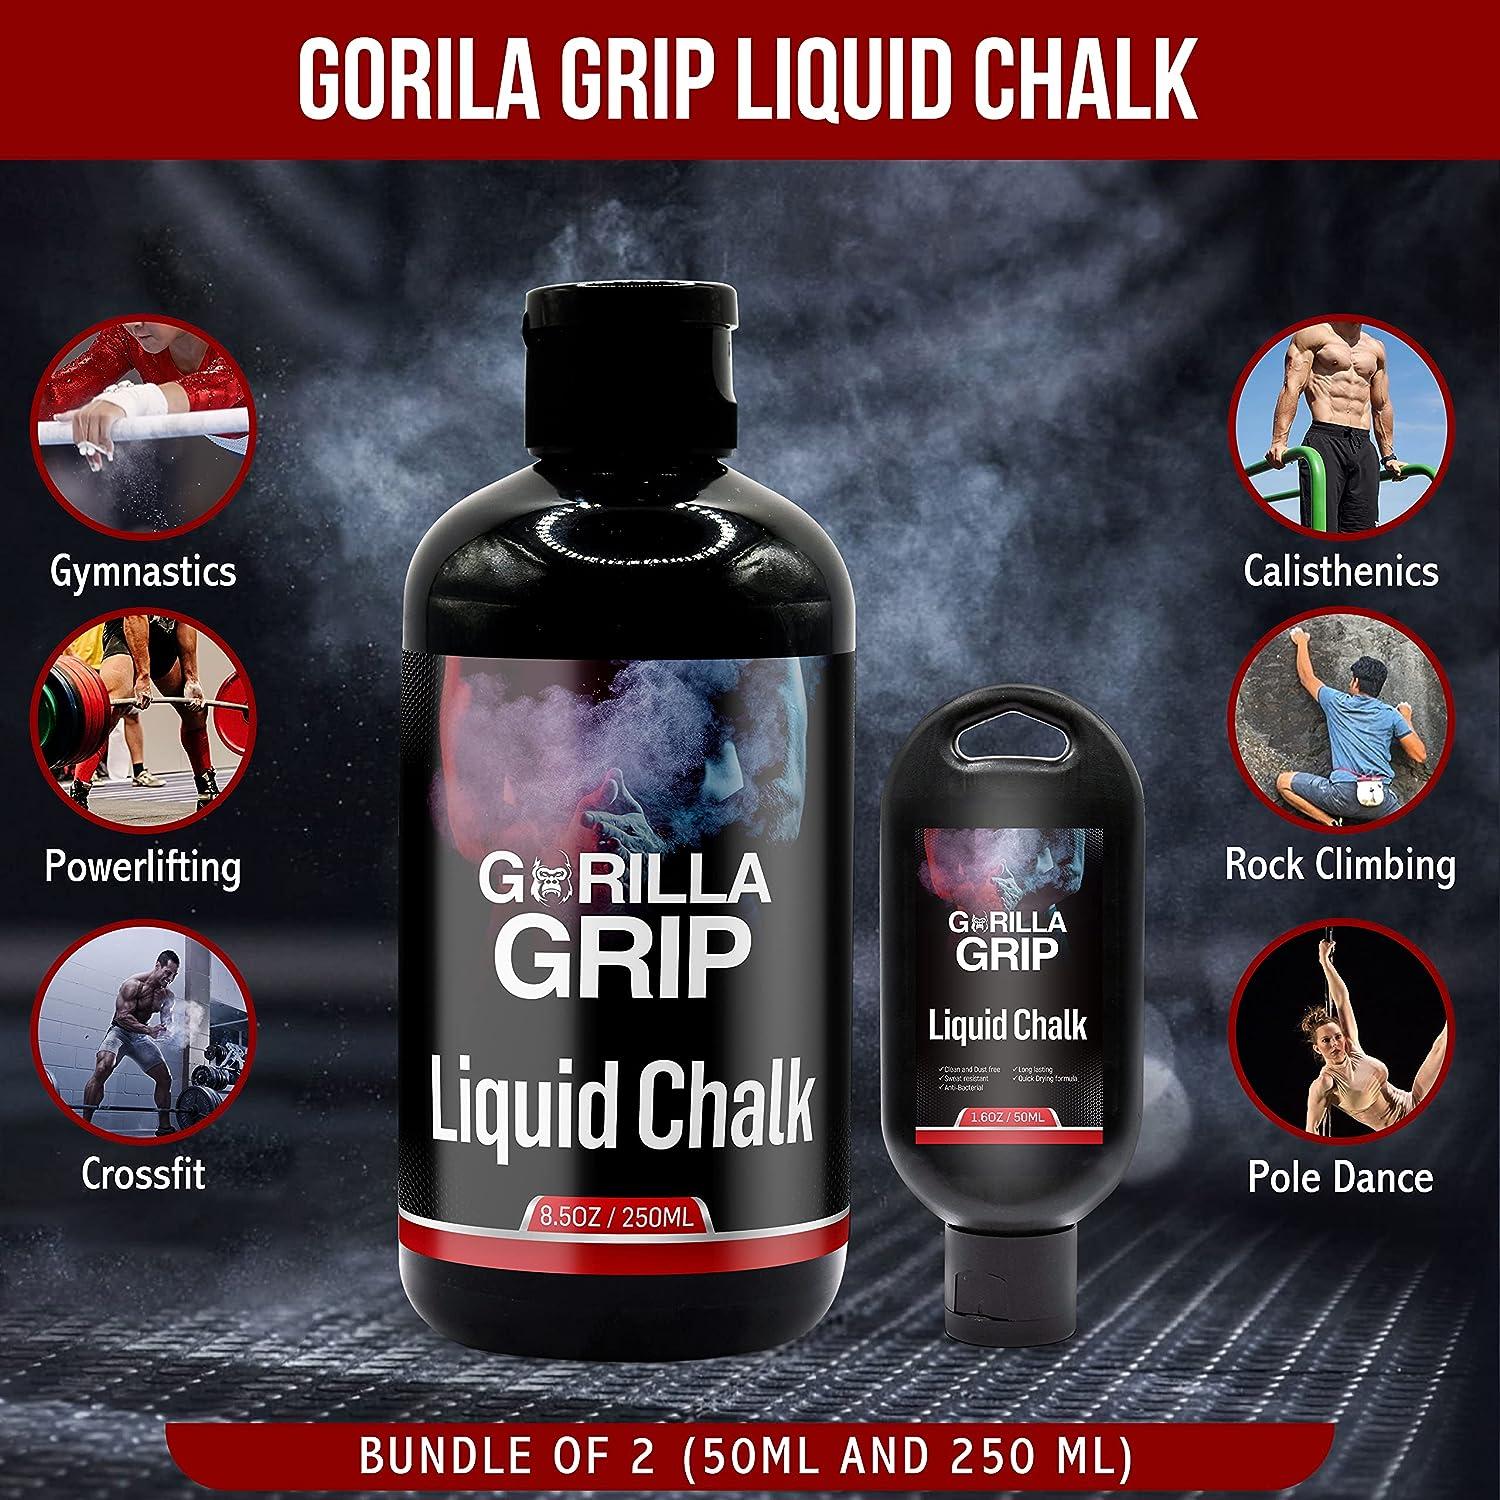 Gorilla Grip Pro Grade Liquid Chalk Bundle of 2 (50ml and 250ml), for  Weightlifting, Rock Climbing, Cross Training, Powerlifting, & Pole Dancing  Gym Approved Workout Chalk for Hands & Calluses.